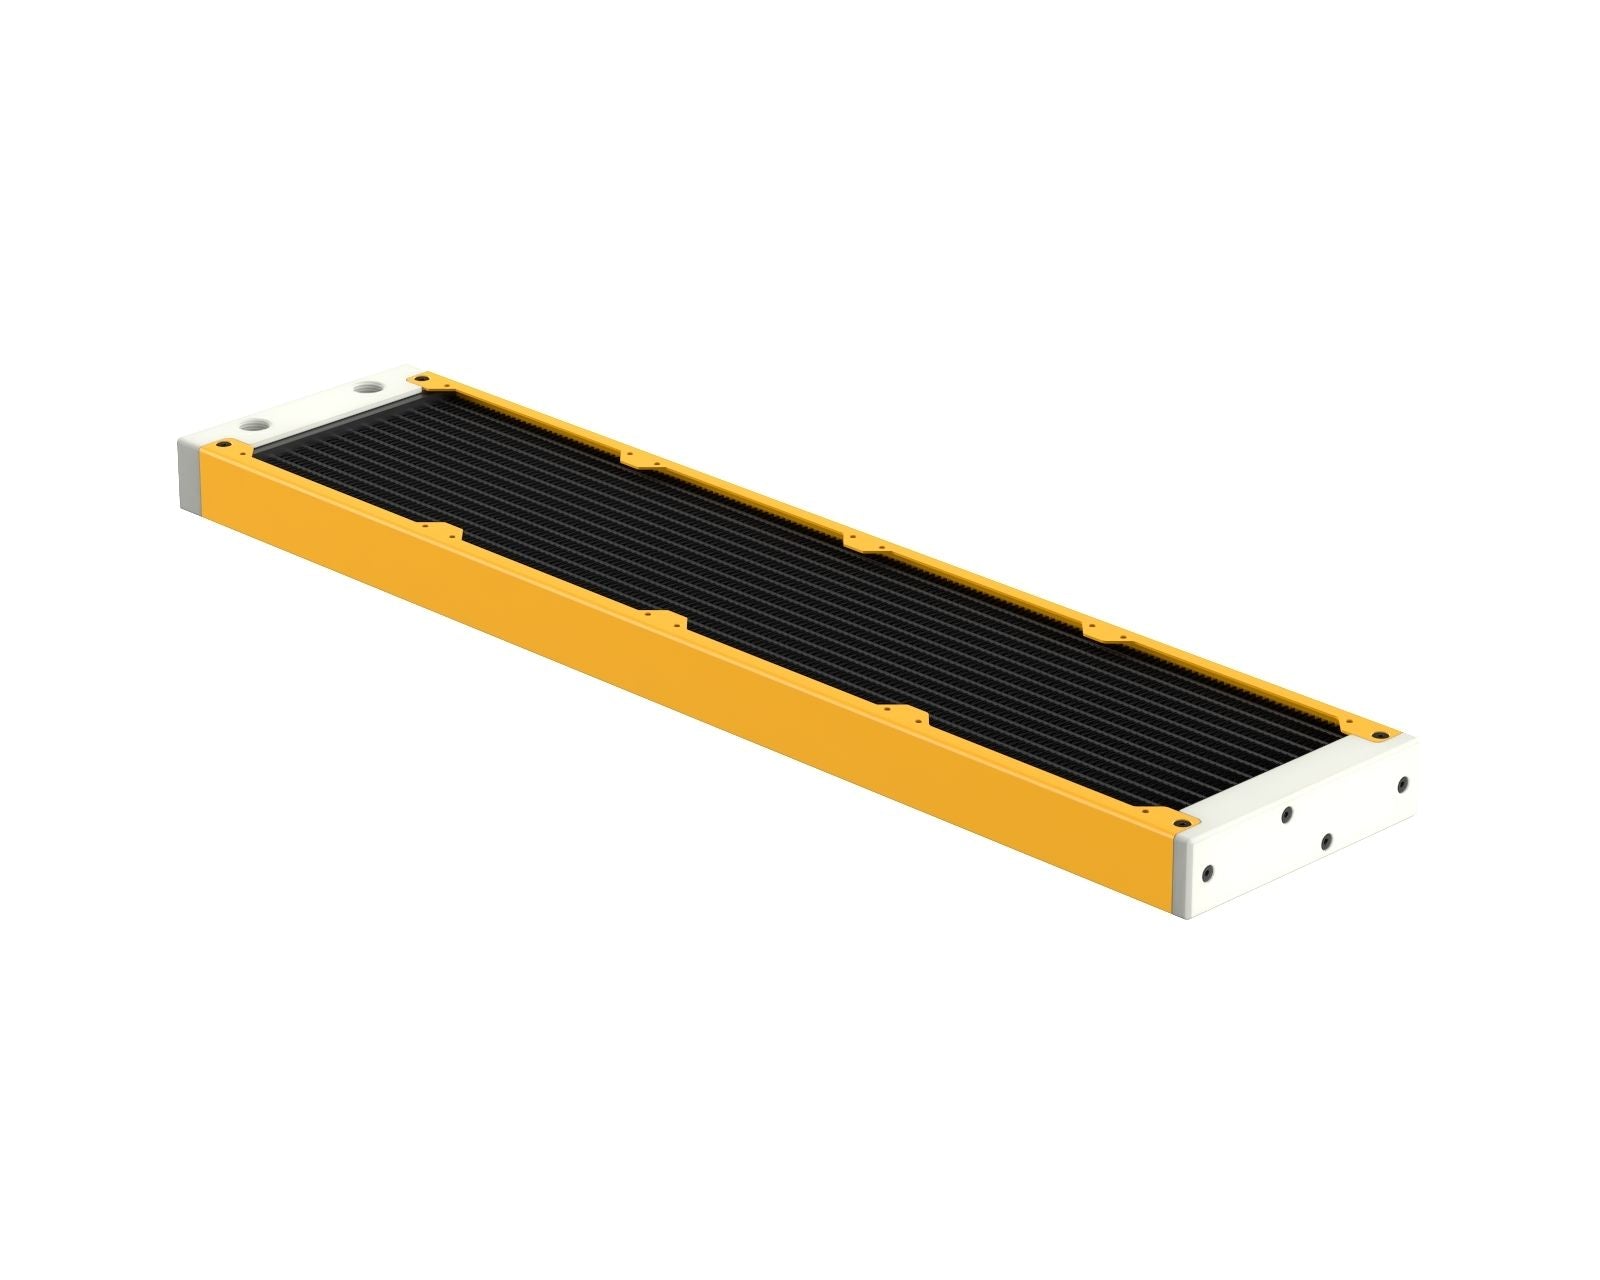 PrimoChill 480SL (30mm) EXIMO Modular Radiator, White POM, 4x120mm, Quad Fan (R-SL-W48) Available in 20+ Colors, Assembled in USA and Custom Watercooling Loop Ready - Yellow